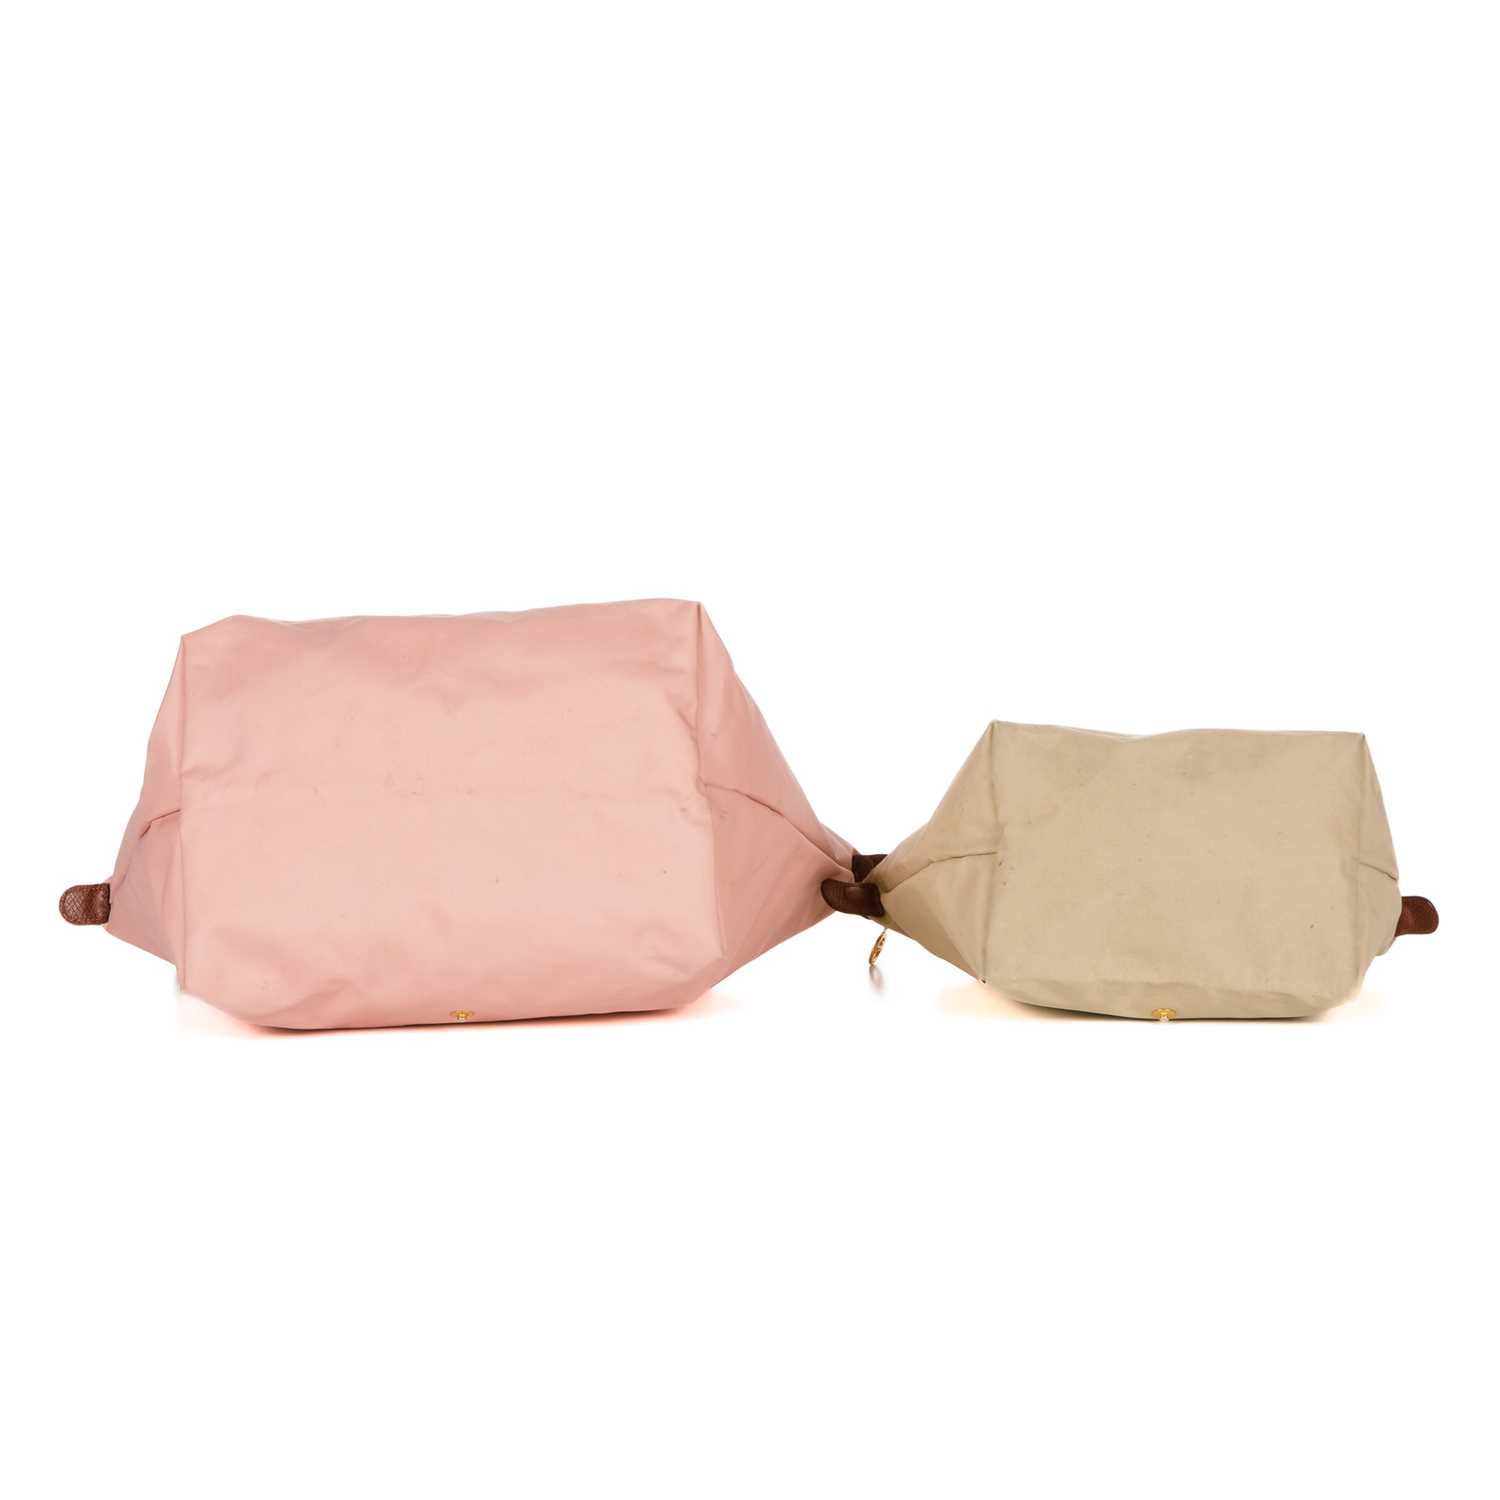 Longchamp, two Le Pliage handbags, to include a medium-sized pink example and a small beige example, - Image 4 of 4